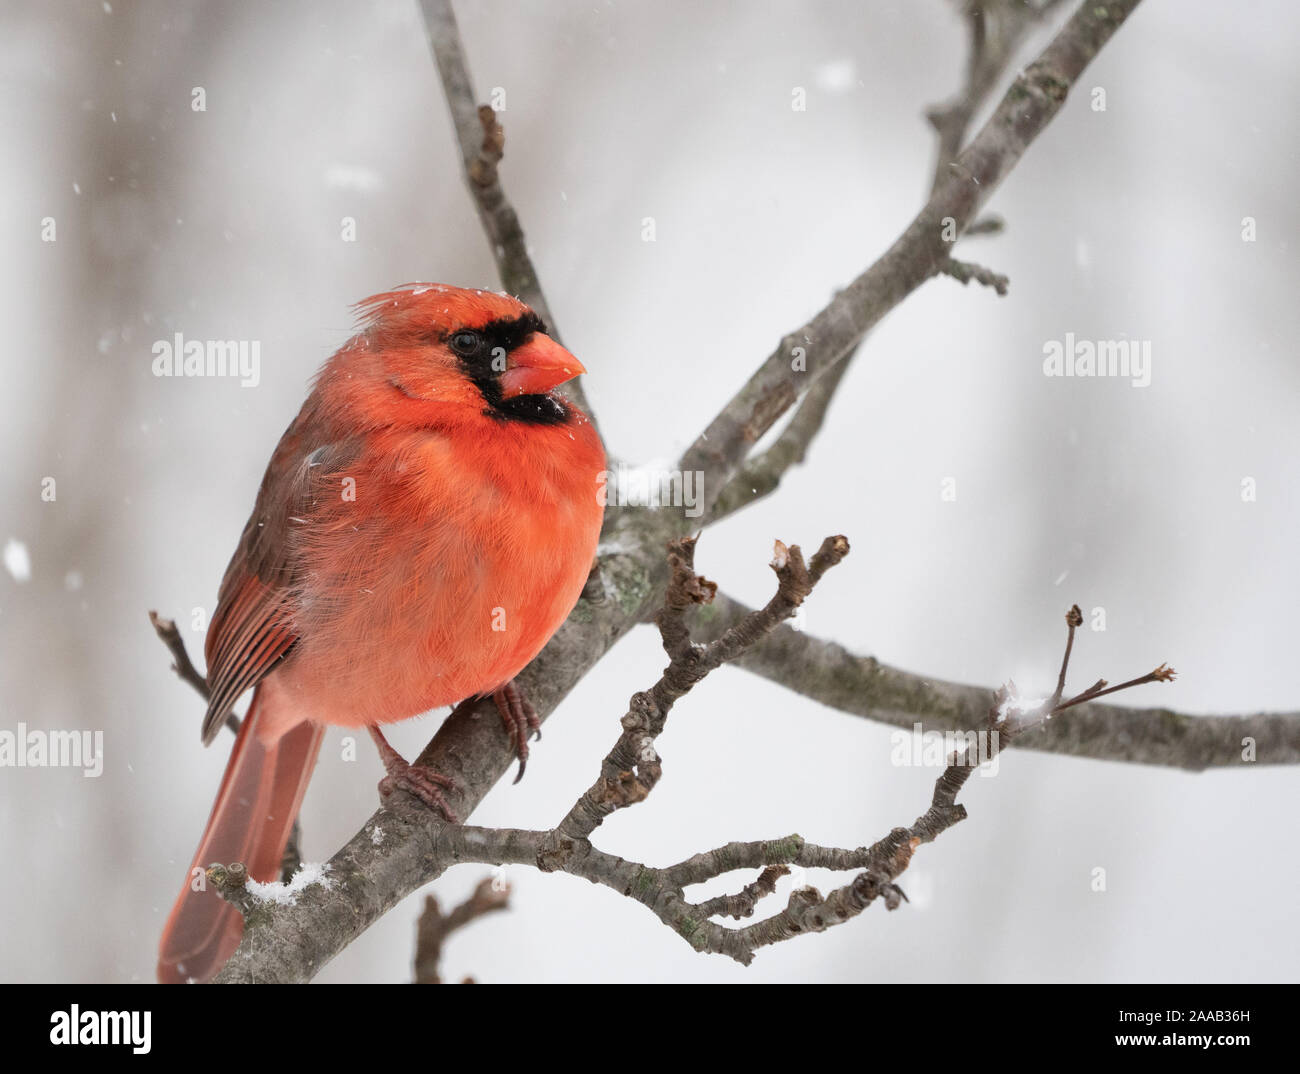 A beautiful young male Northern Cardinal (Cardinalis cardinalis) on tree branch on snowy day. Stock Photo